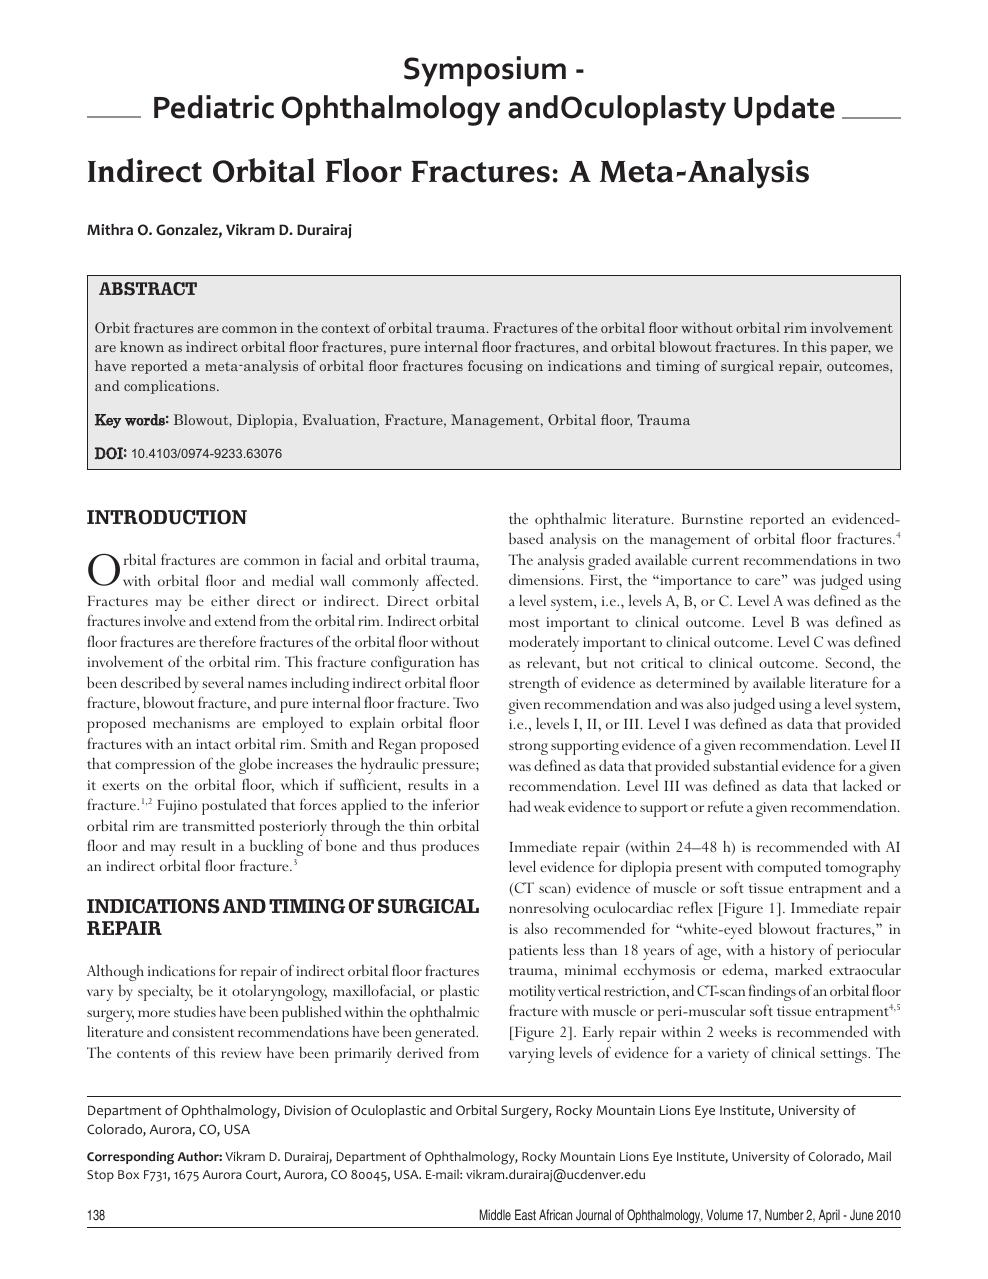 Indirect Orbital Floor Fractures A Meta Analysis Topic Of Research Paper In Clinical Medicine Download Scholarly Article Pdf And Read For Free On Cyberleninka Open Science Hub